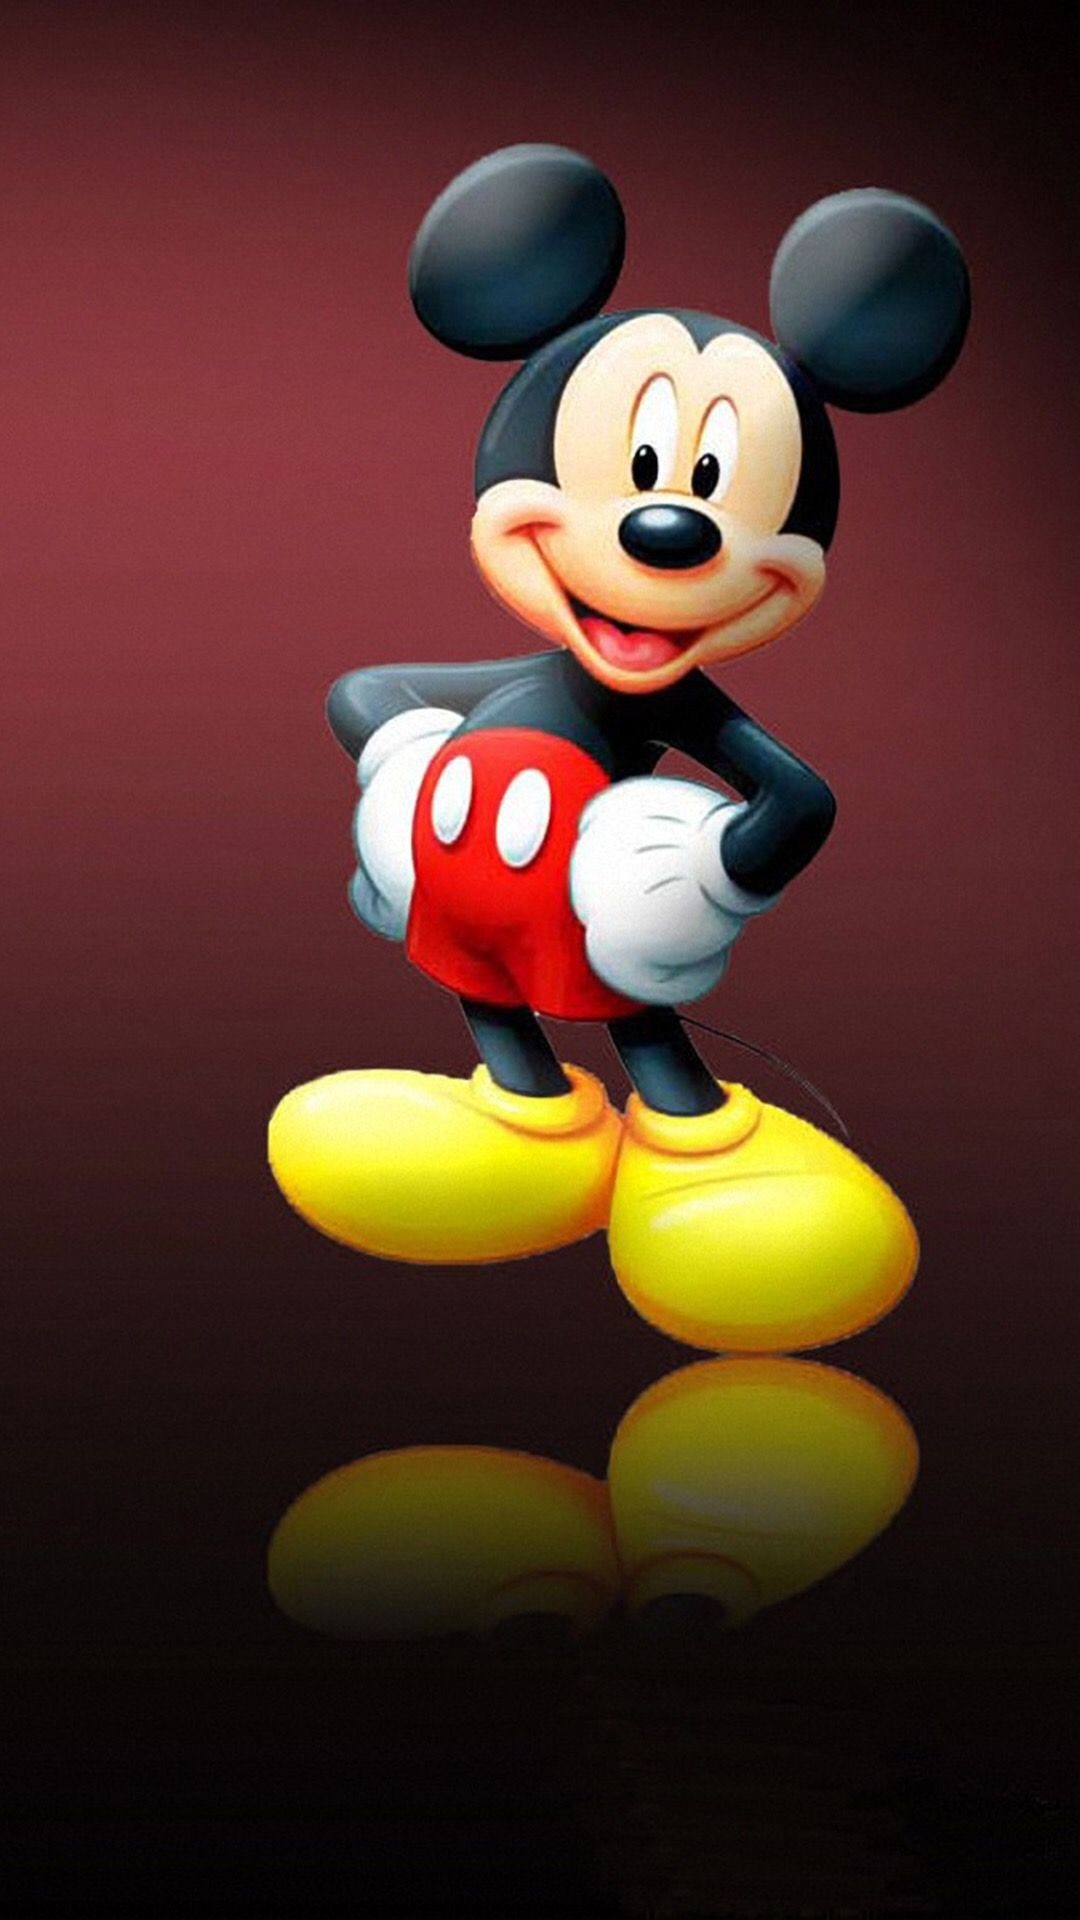 Mickey Mouse Wallpaper Iphone, Iphone 6 Wallpaper, - Iphone Mickey Mouse Wallpaper Hd - HD Wallpaper 